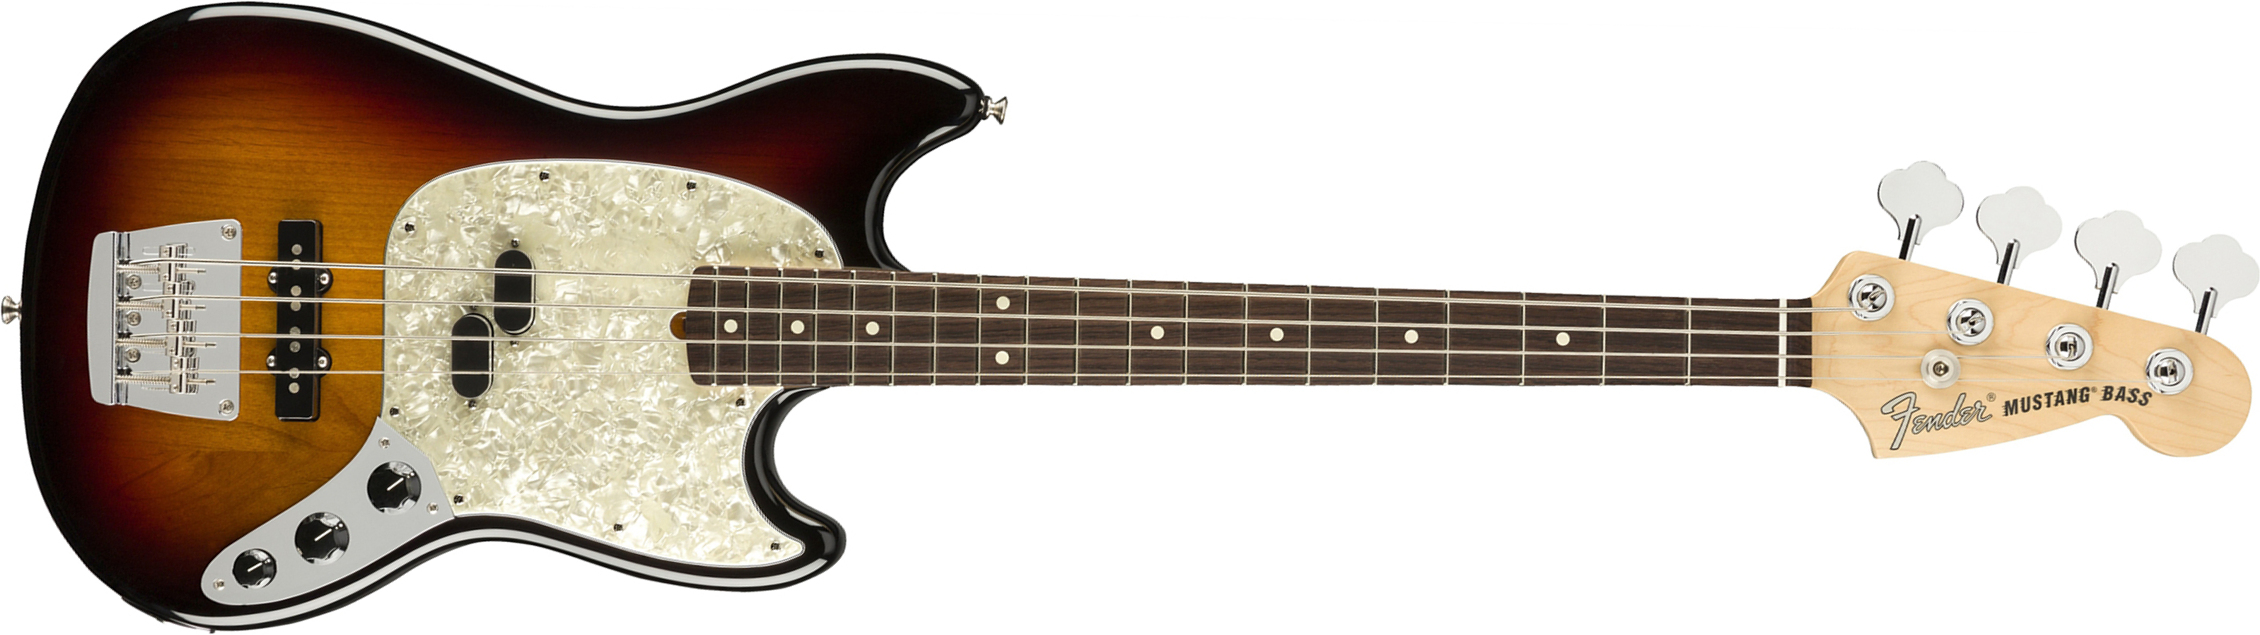 Fender Mustang Bass American Performer Usa Rw - 3-color Sunburst - Electric bass for kids - Main picture